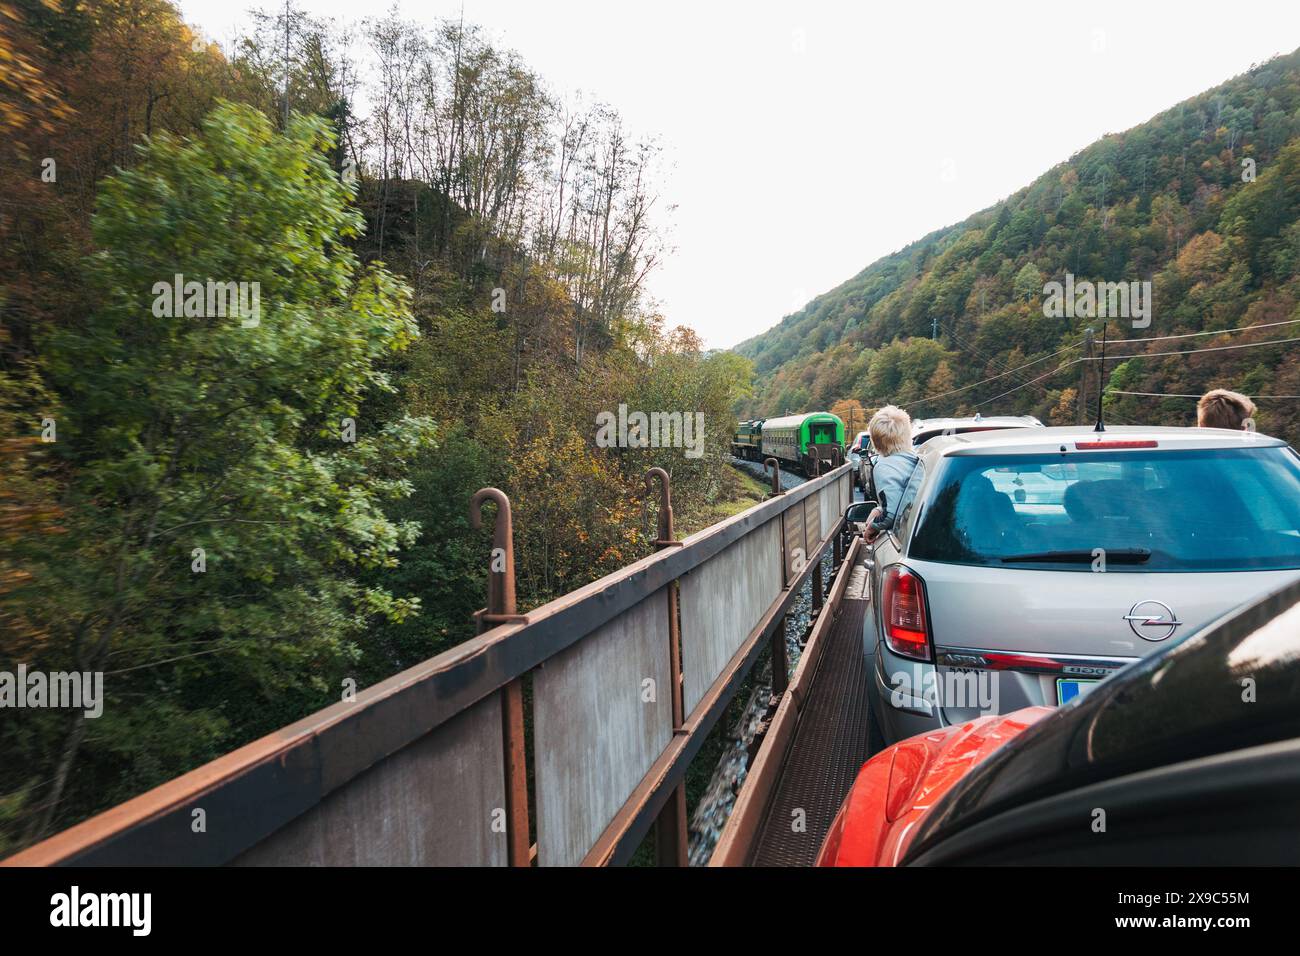 Young boys lean out a car window as it travels on the back of a motorail train carriage as it travels through tunnels and gorges in Slovenia Stock Photo